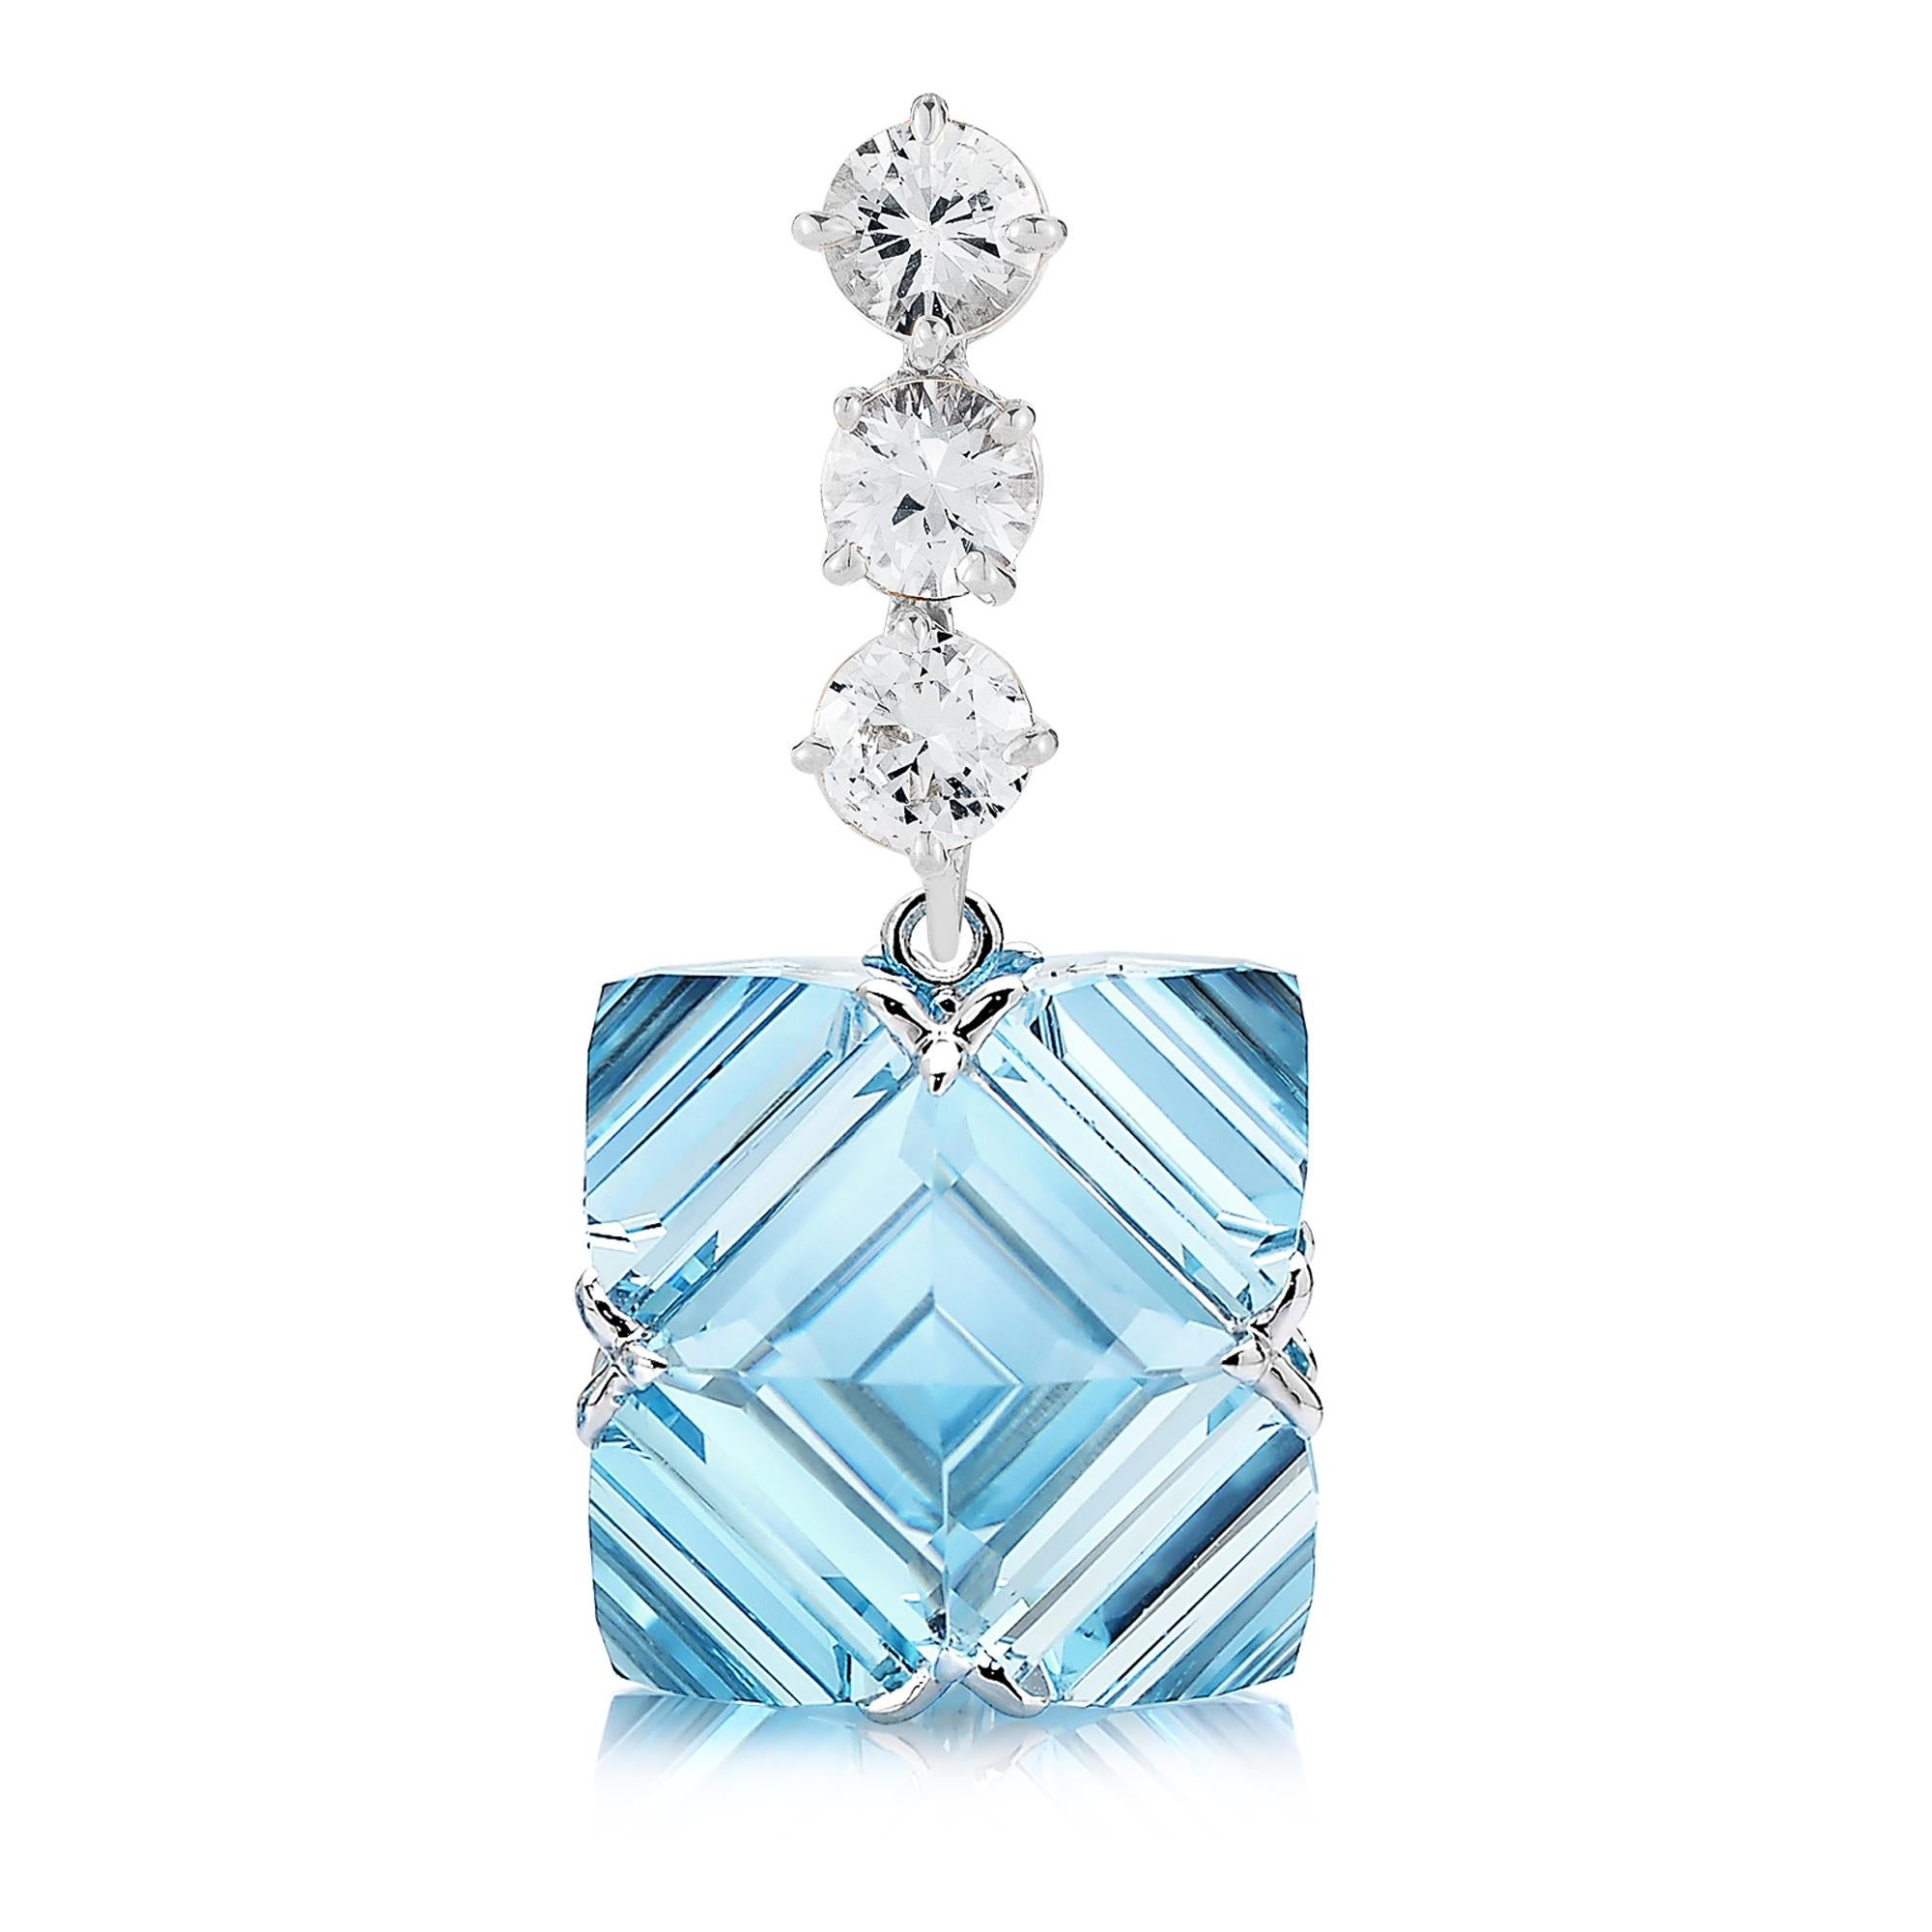 Emerald Cut Paolo Costagli 18 Karat Gold White Sapphire and Blue Topaz Very PC Earrings For Sale